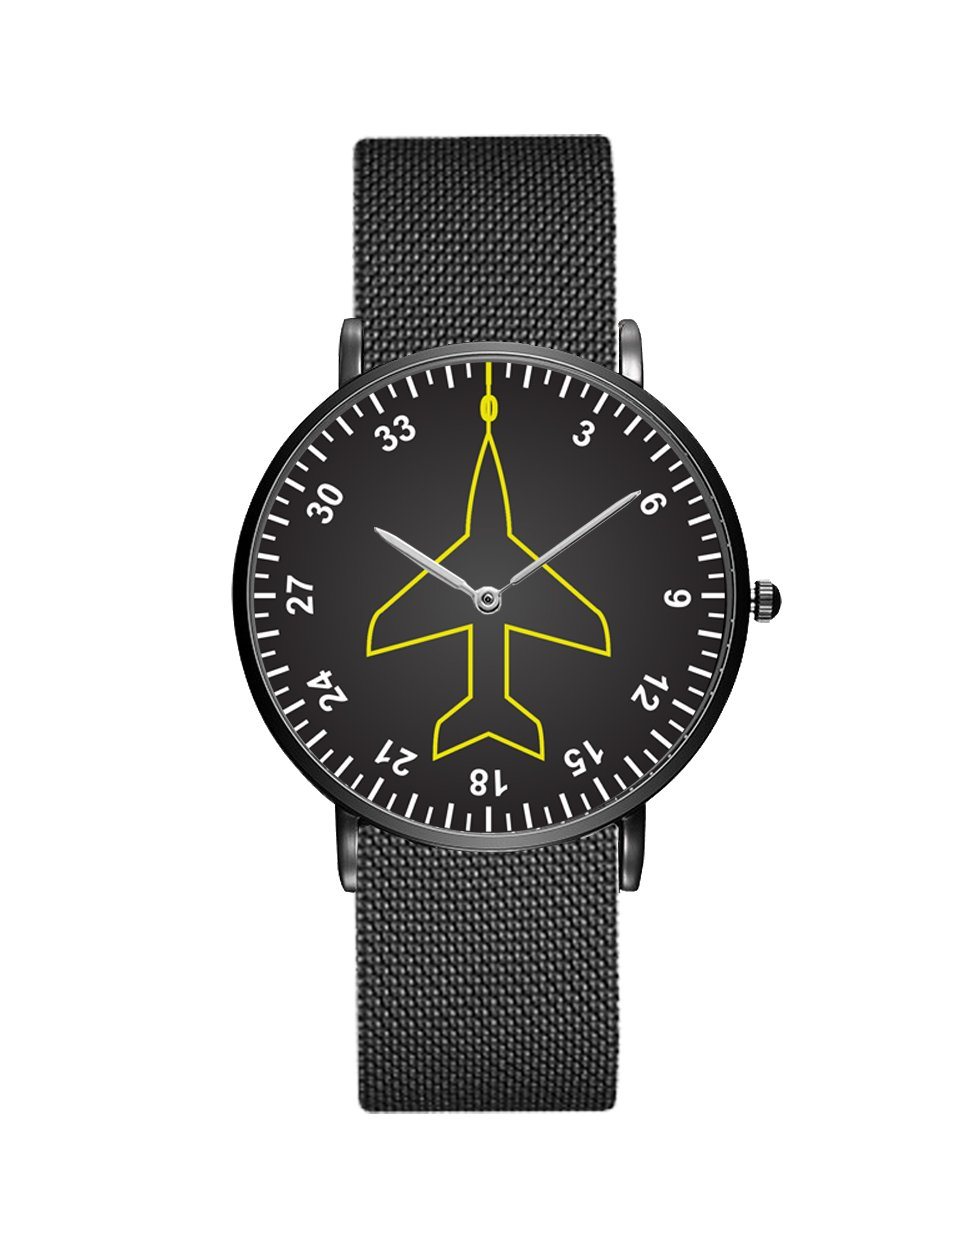 Airplane Instrument Series (Heading) Stainless Steel Strap Watches Pilot Eyes Store Black & Stainless Steel Strap 